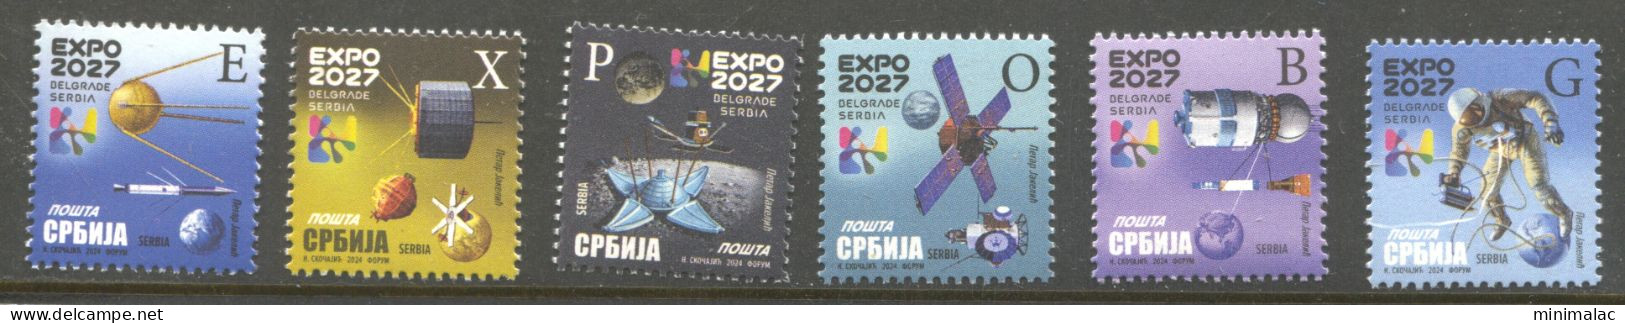 Serbia 2024, Definitive Postage Stamps Of The Republic Of Serbia 2024-2027, EXPO 2027, Space. Full Series 6 Pts, MNH - Servië